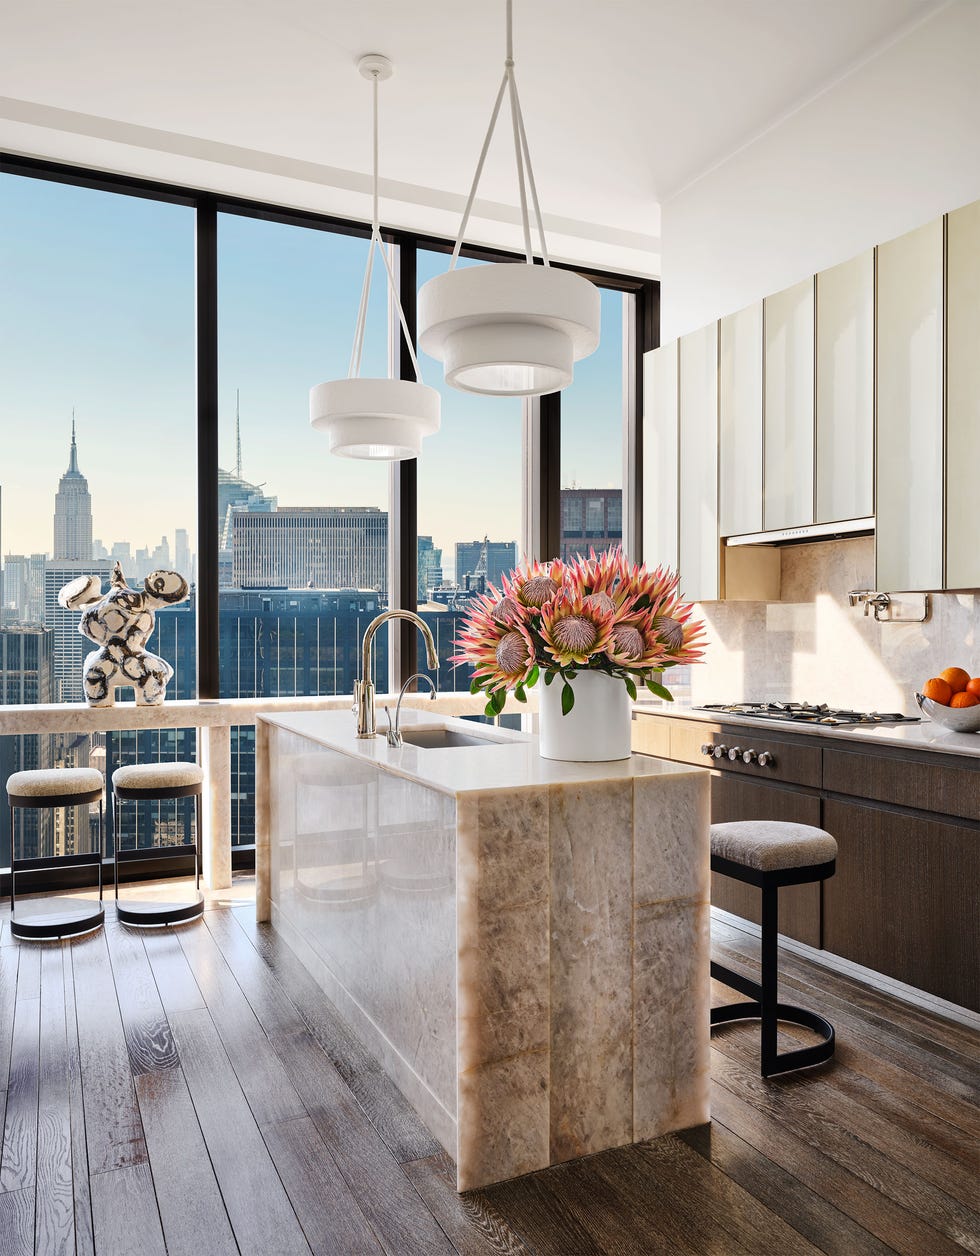 Kitchen with large windows has a narrow counter with stools and skyscraper views, a sink and marble island with a flower display and two pendants above it, wood cabinets below the range and white cabinets above.